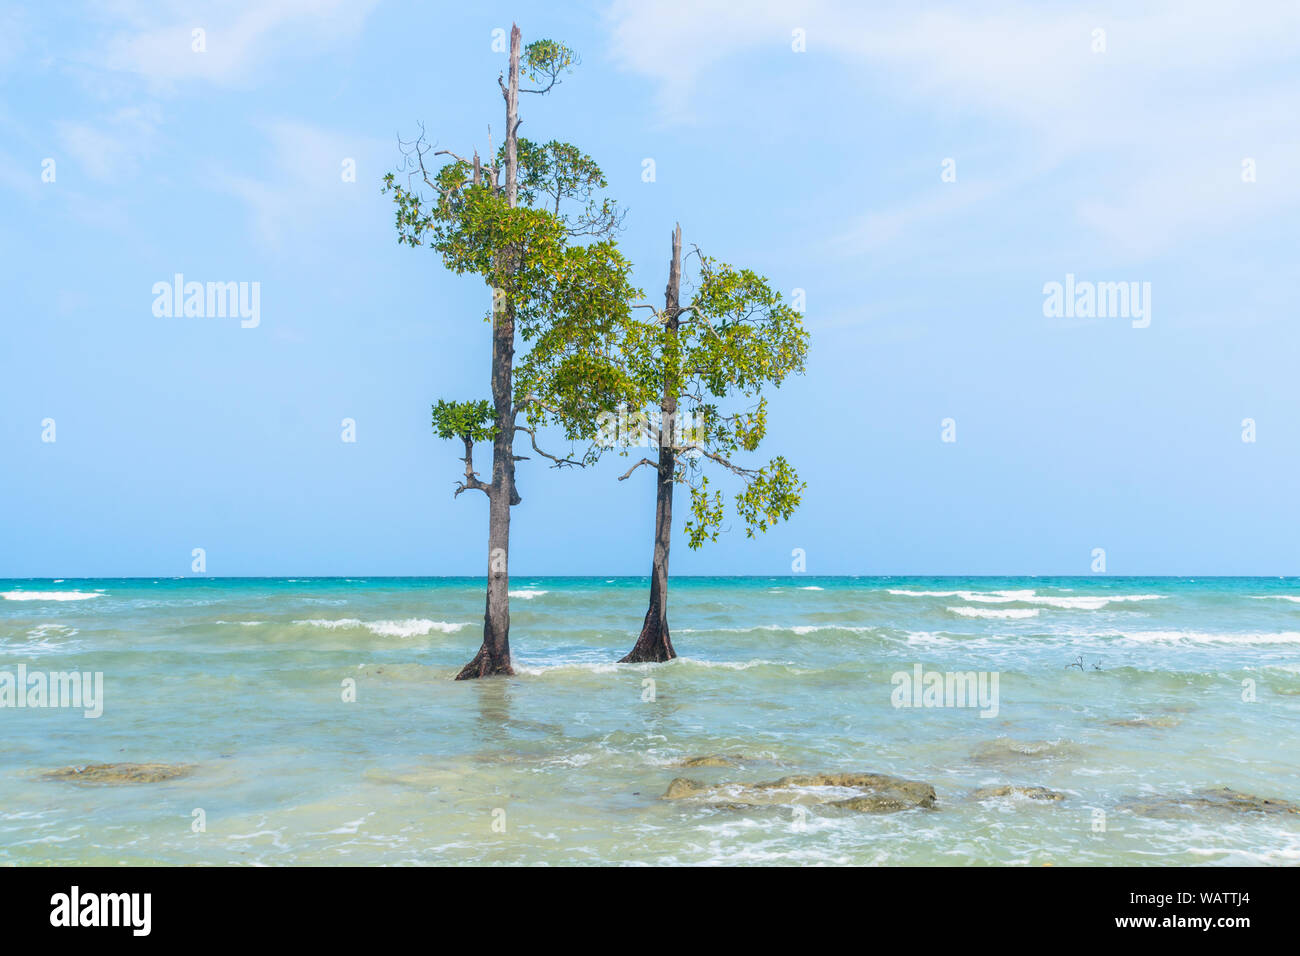 Mangrove Tree Beach. Sea wave washes the trunks and roots of mangroves. Beautiful sea landscape of wild nature in the subtropics. Stock Photo